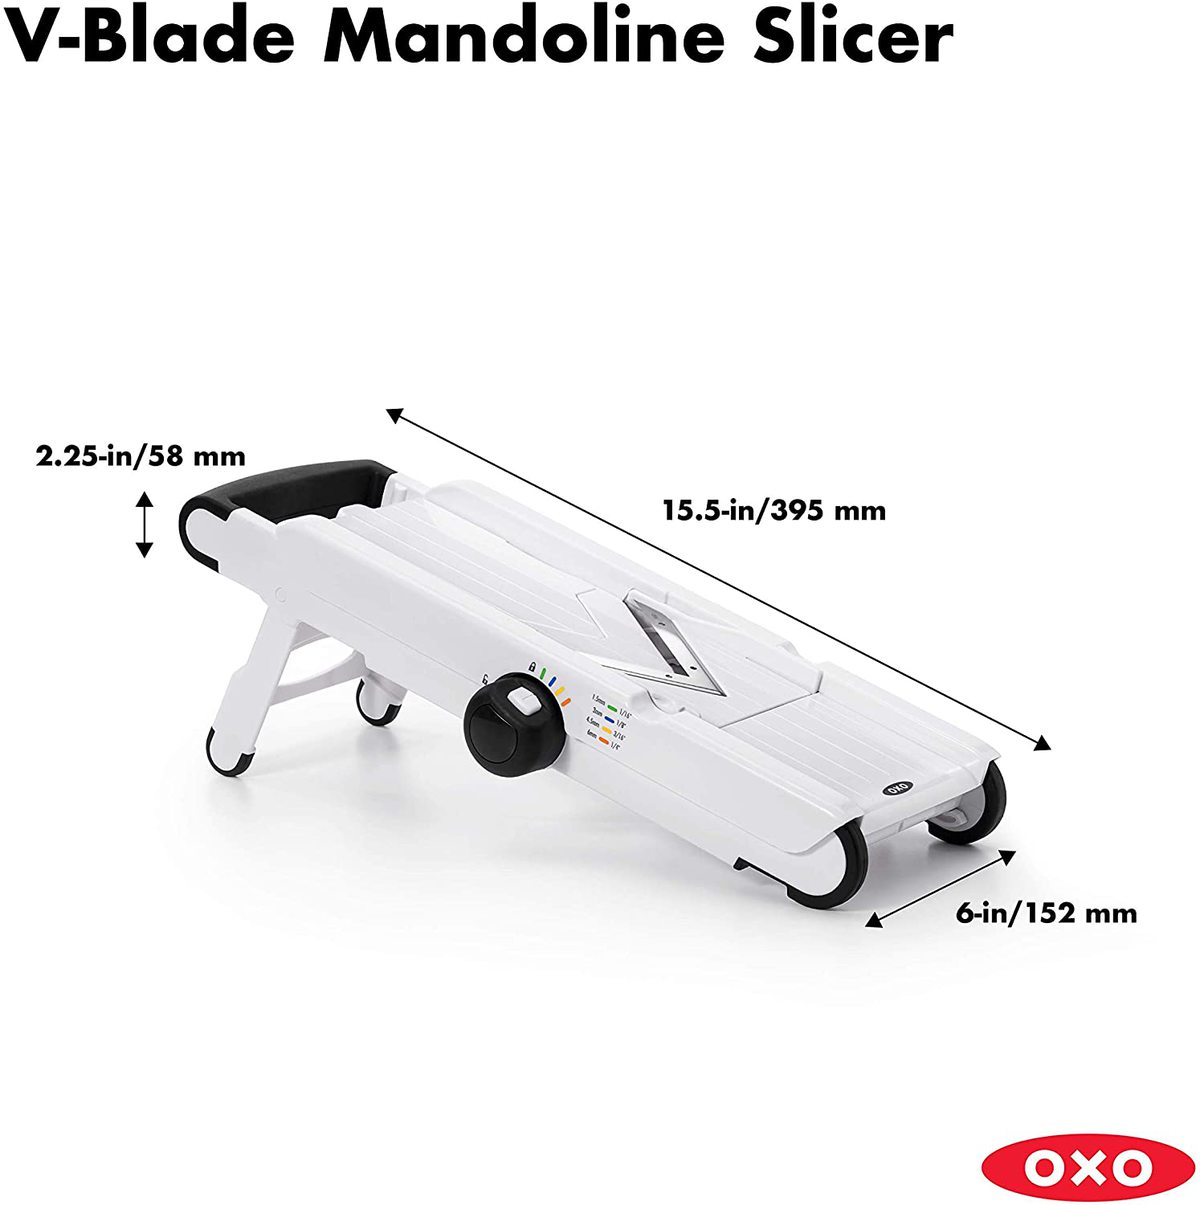 Mandoline Slicer by OXO: Even Slices Every Time! - We Want Veggies